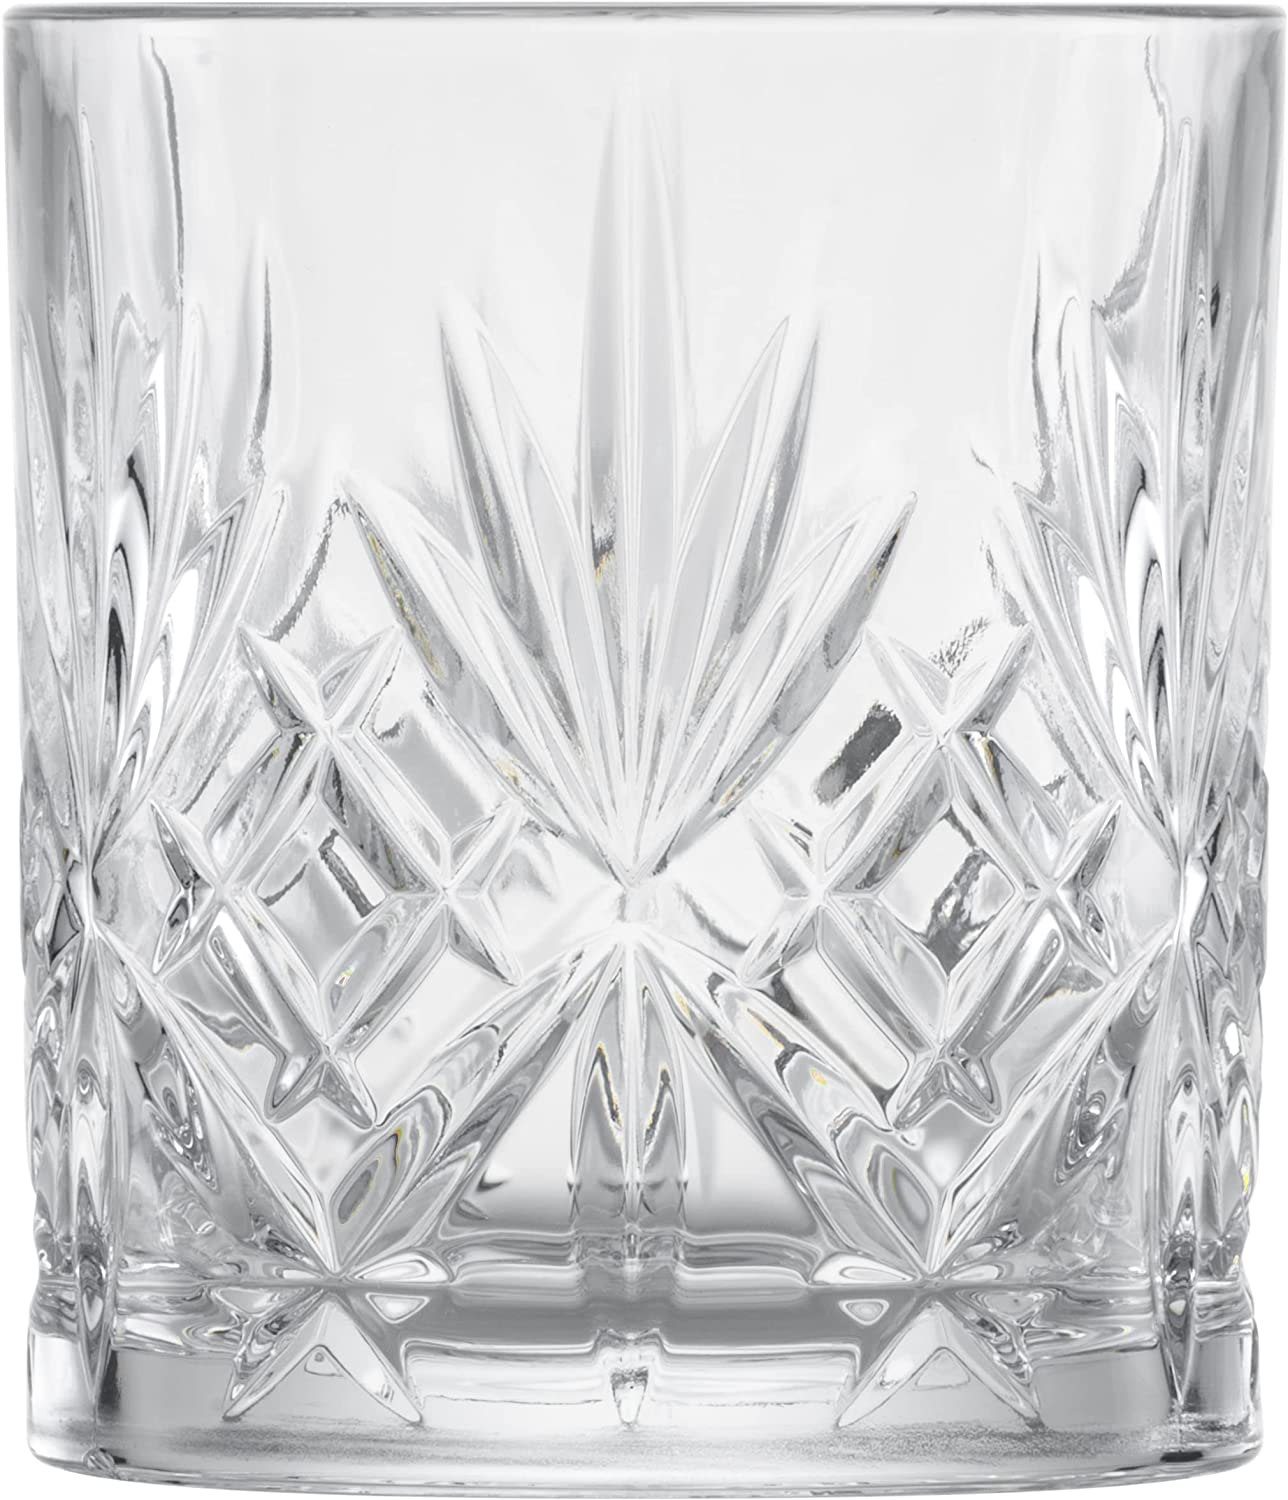 Schott Zwiesel Whisky Tumbler No. 60 / H. 94 mm 18 Inches (Pack of 18)